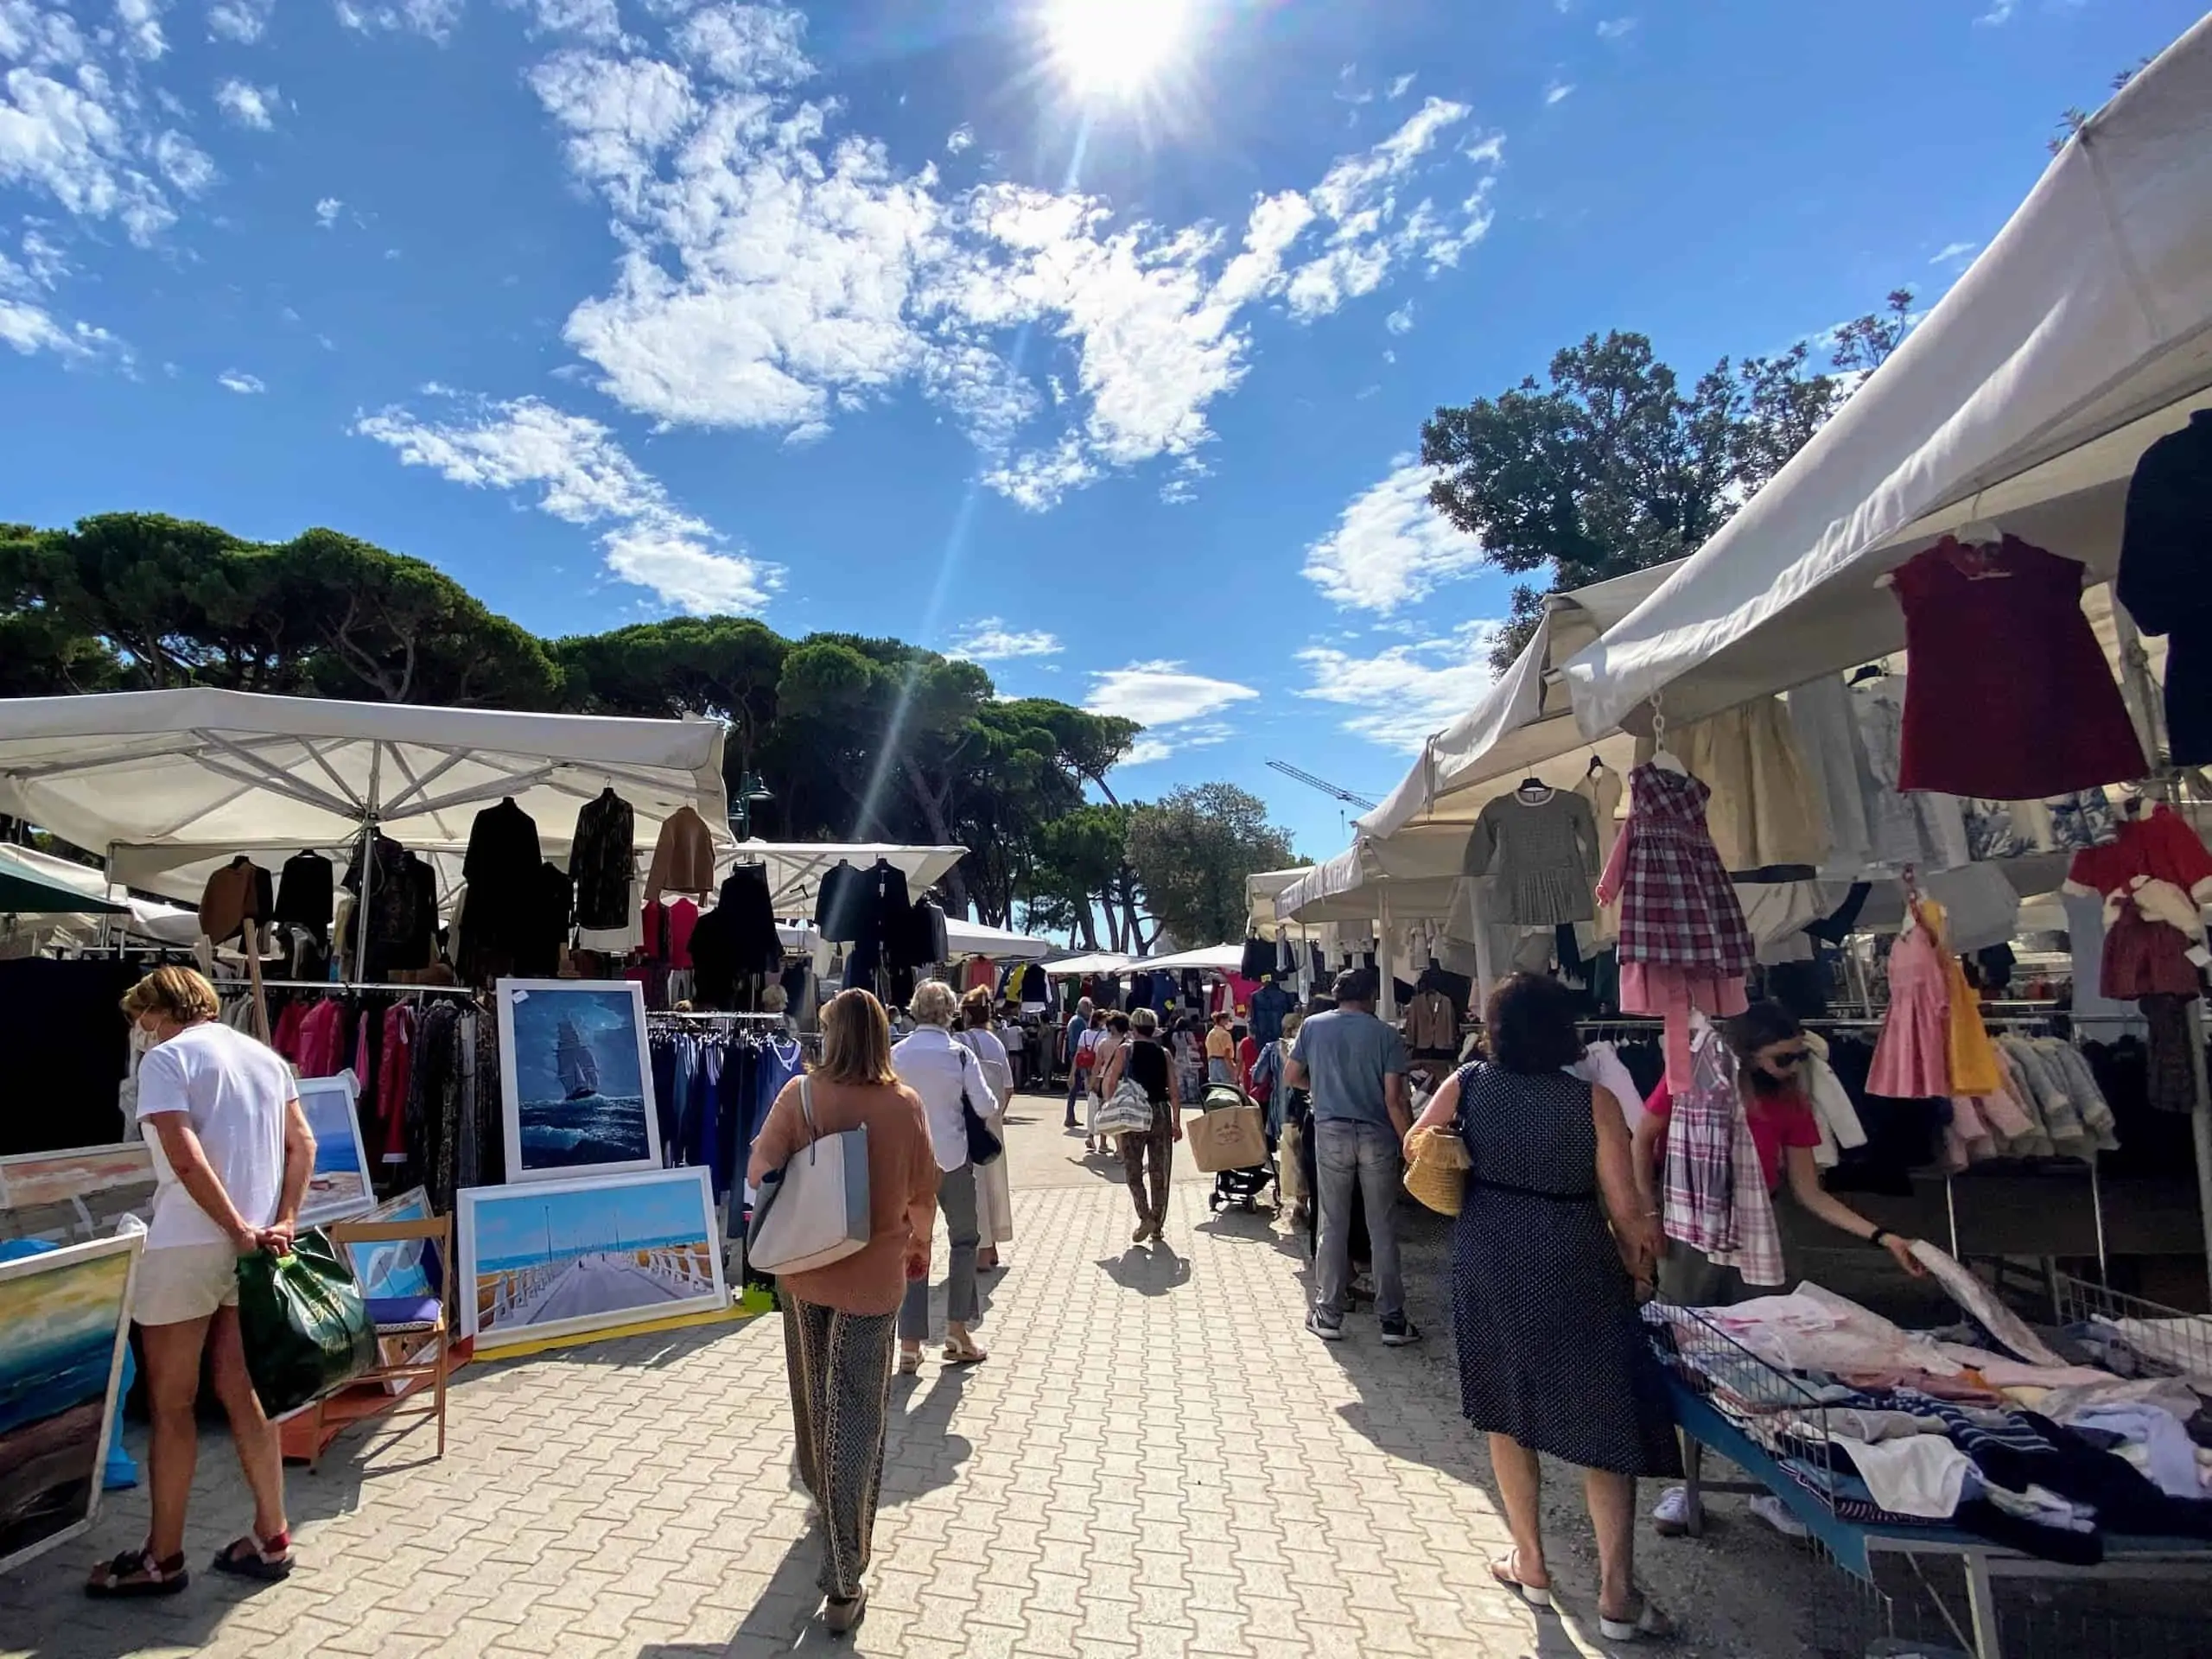 the entrance to the market in forte dei marmi, italy on a sunny day